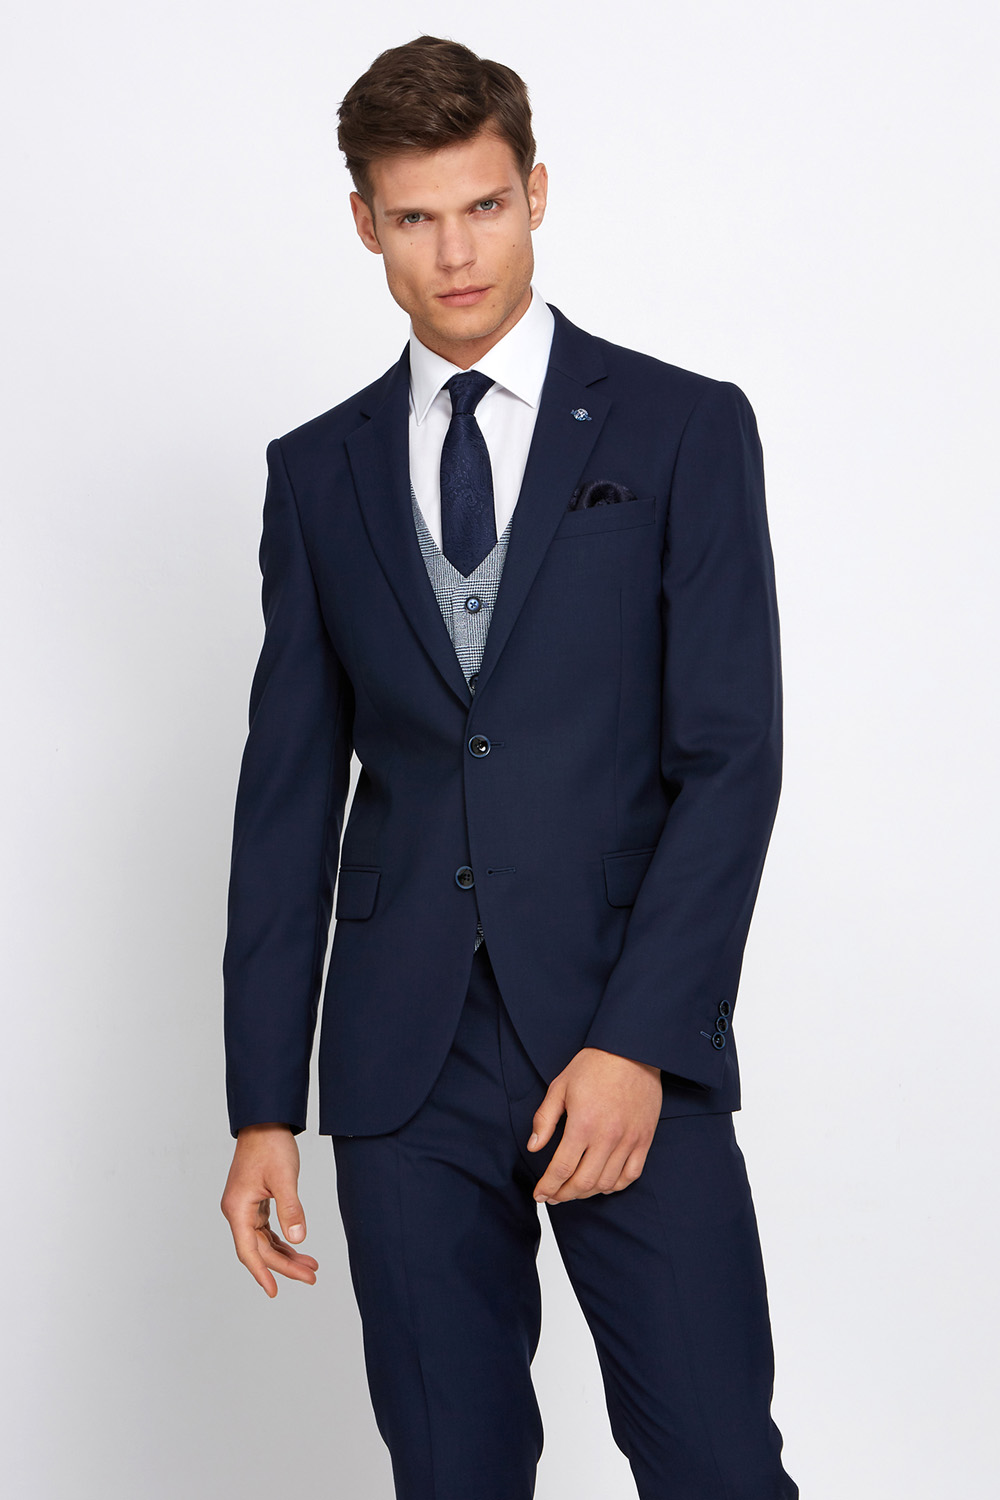 Marvin Navy Wedding Suit - Tom Murphy's Formal and Menswear